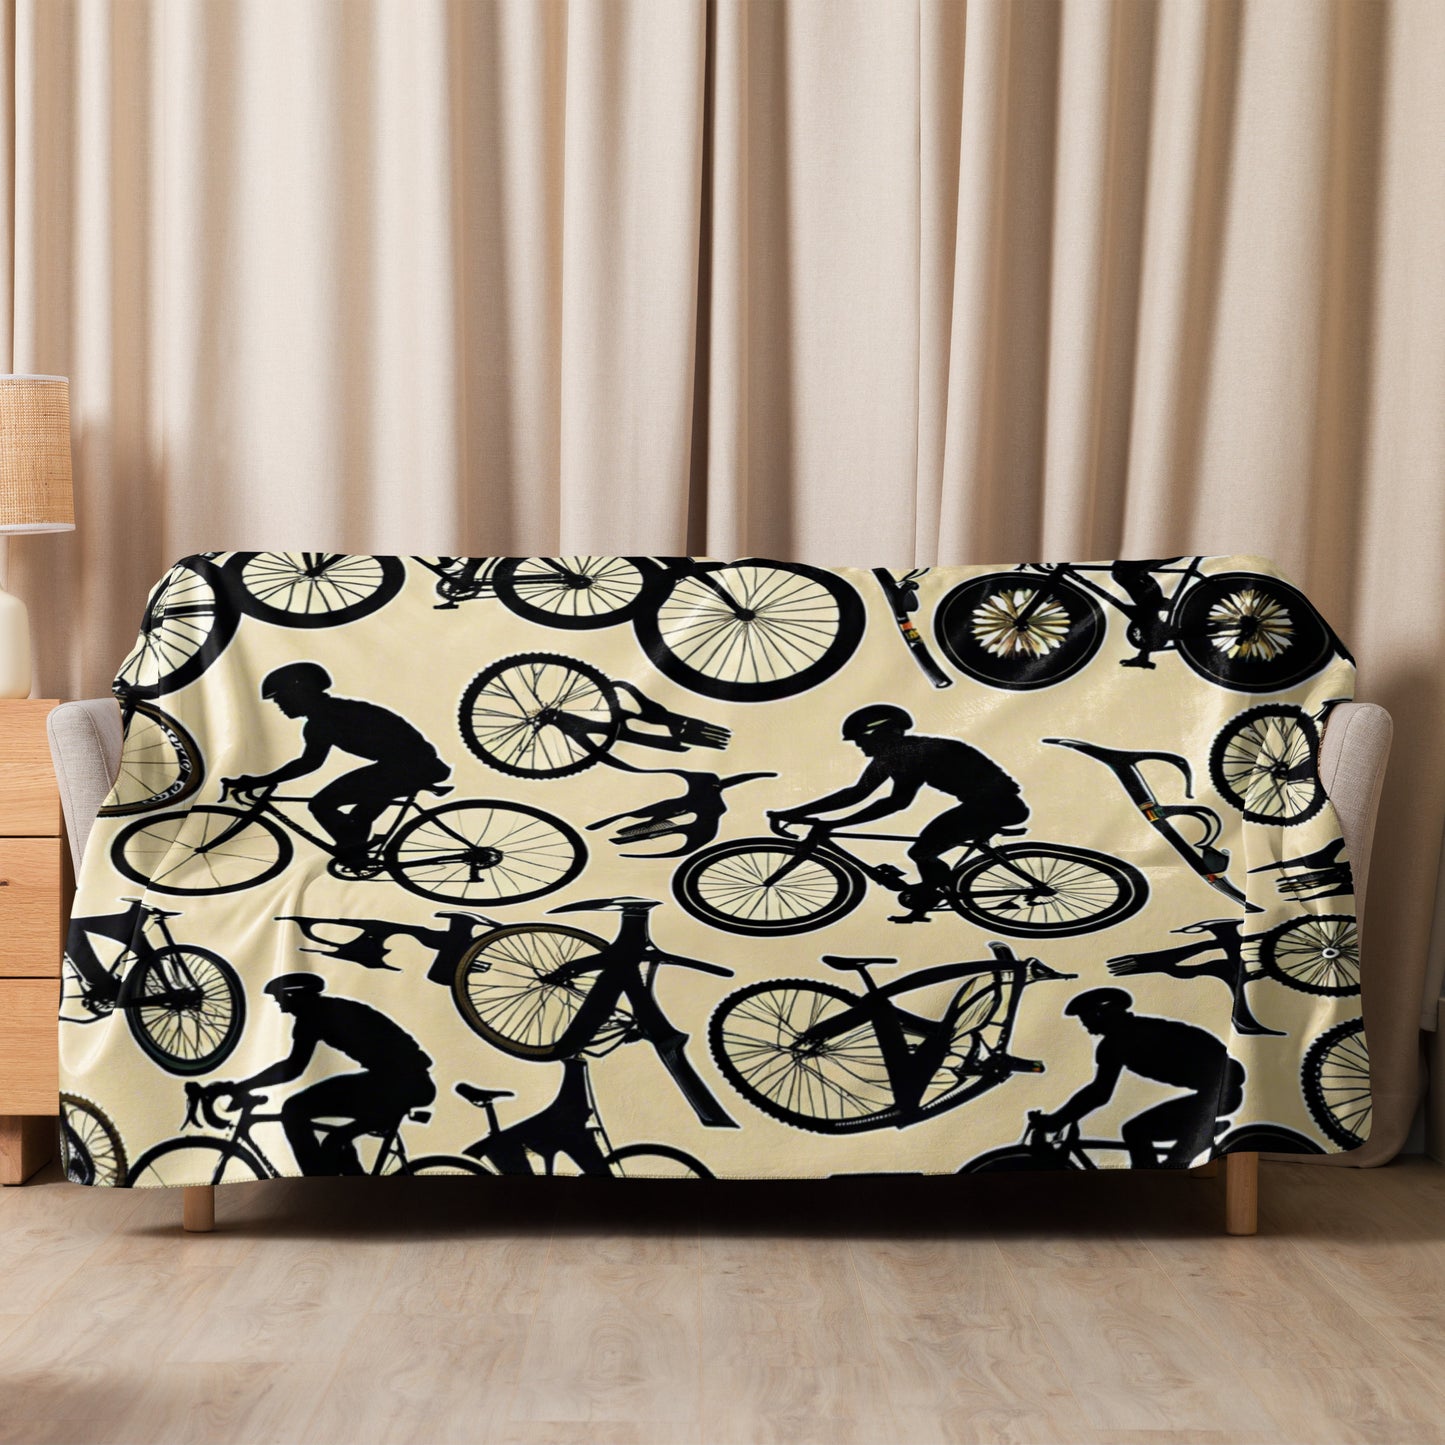 Cyclist Sherpa Blanket, Colorful Cyclist Blanket Gift